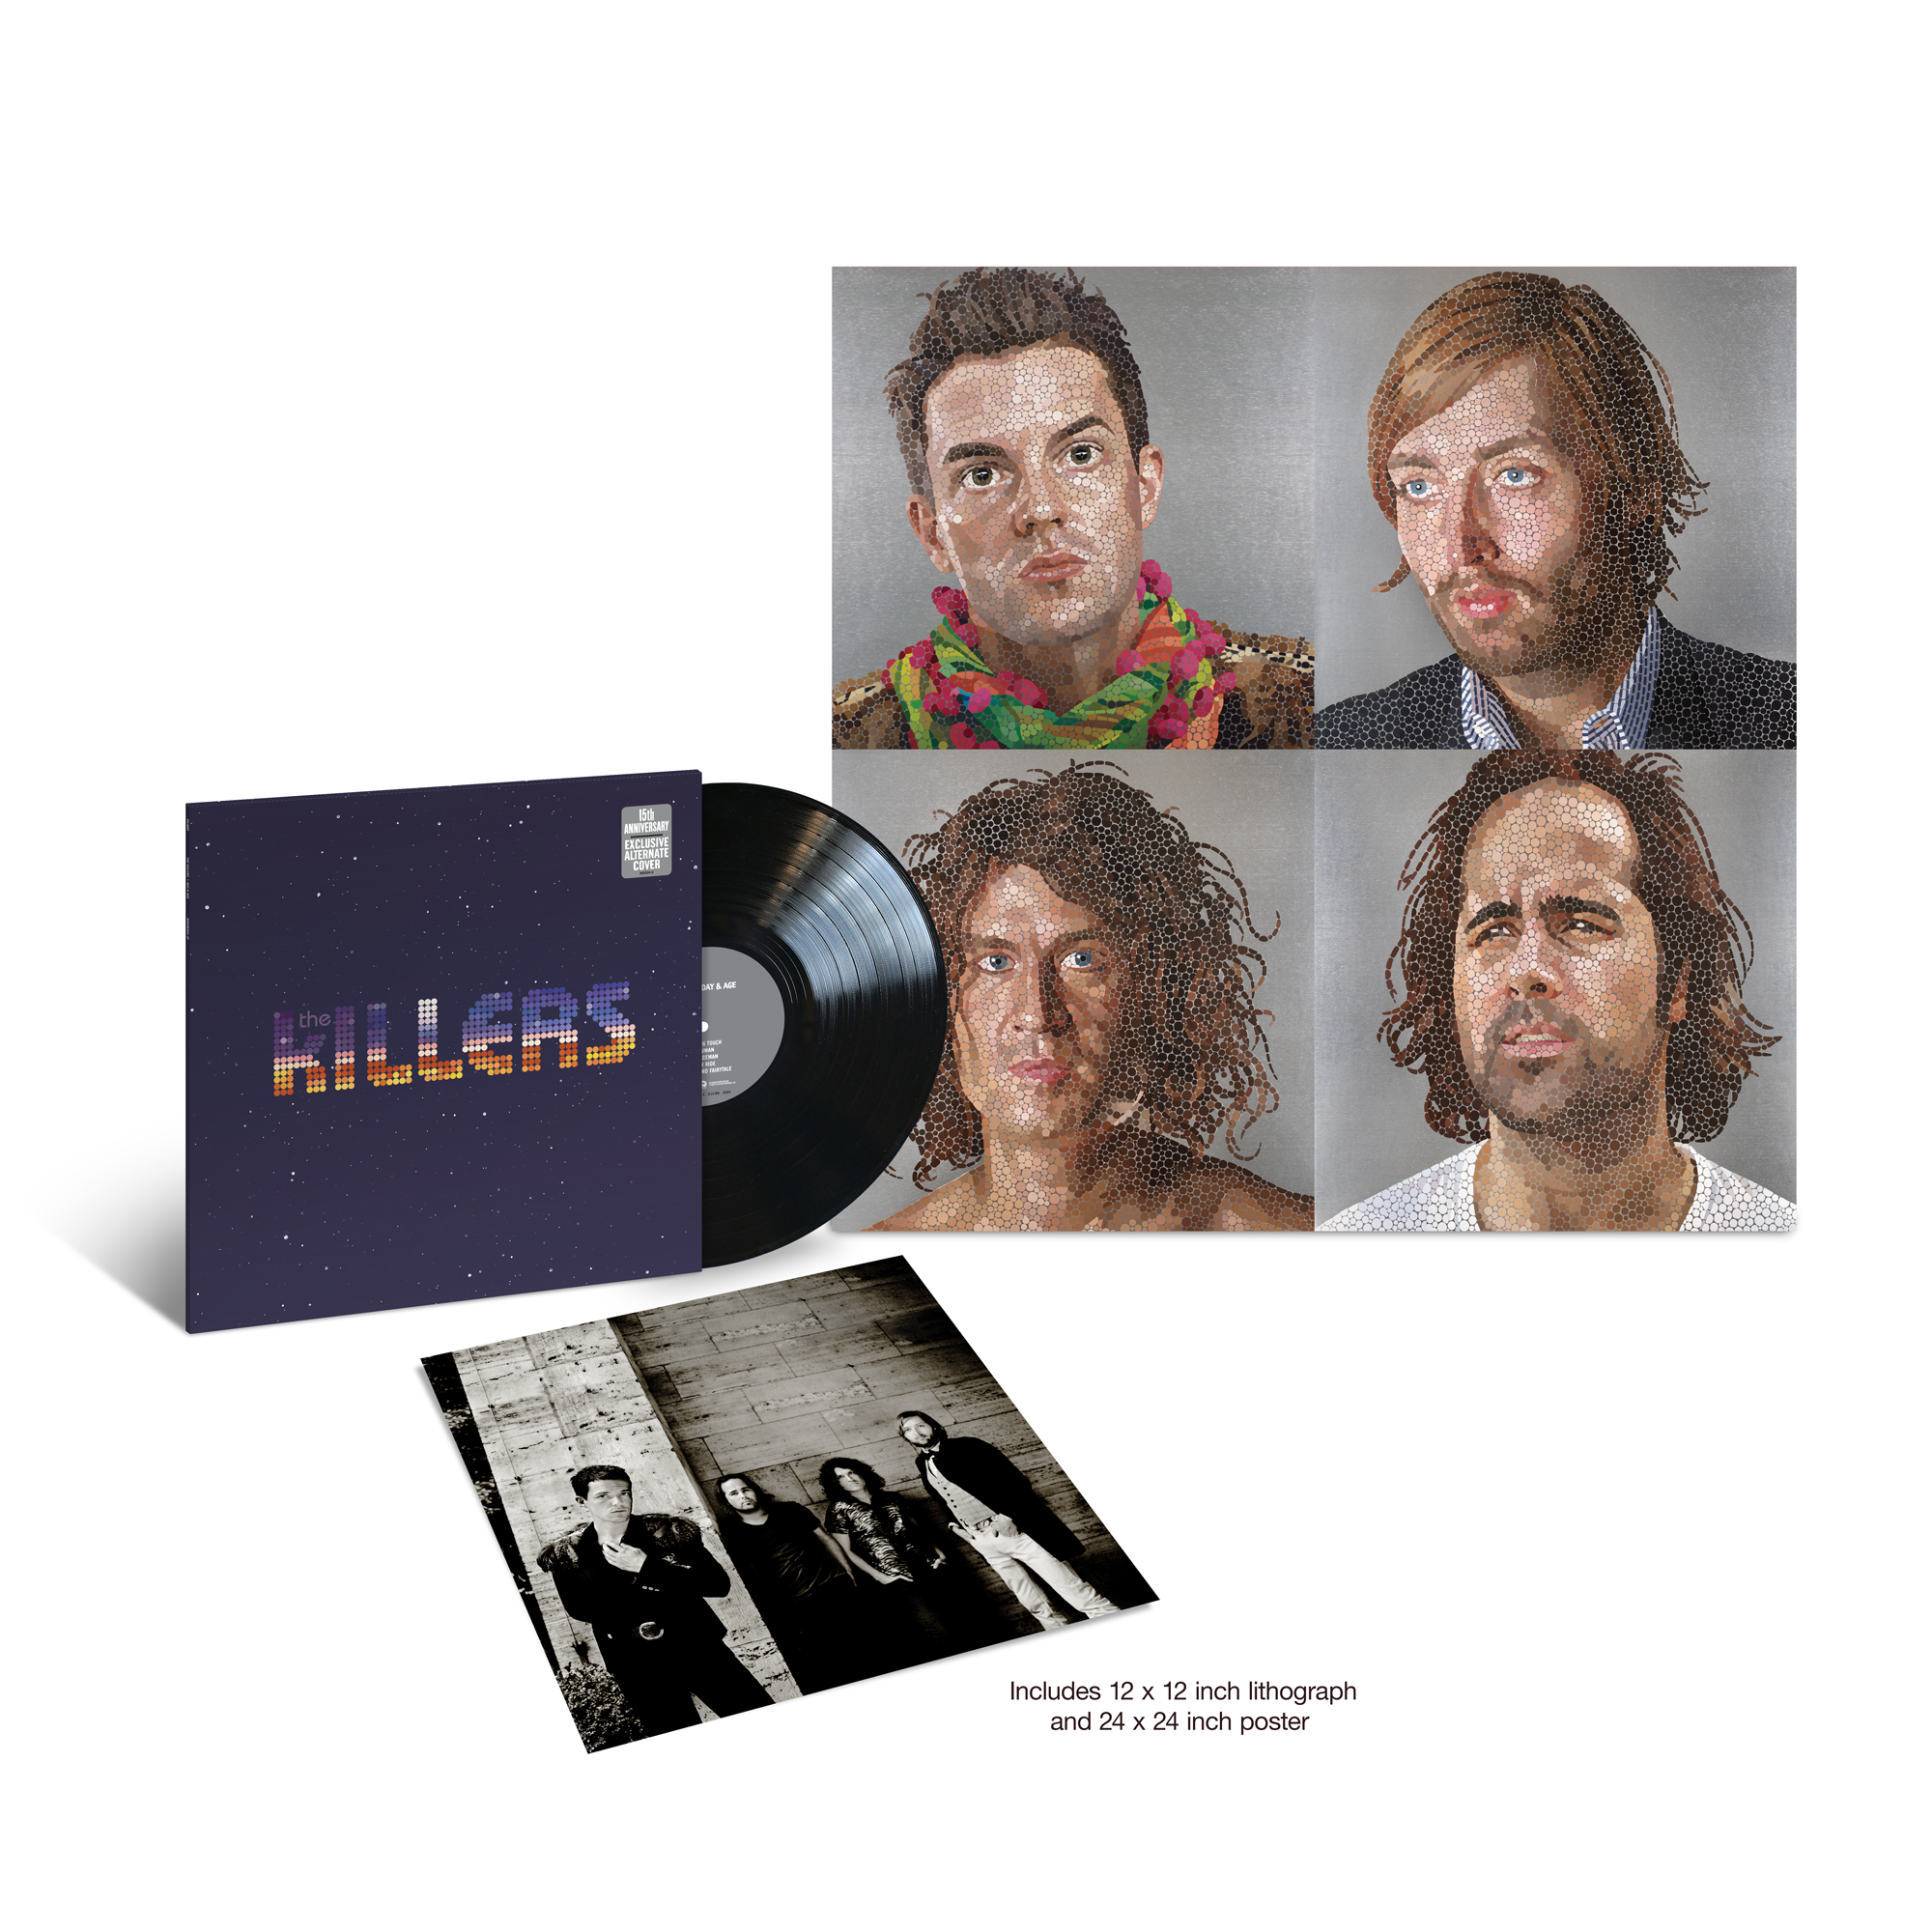 The Killers - Day & Age (15th Anniversary): Limited Vinyl LP w/ Alt Sleeve, Poster + Litho Print